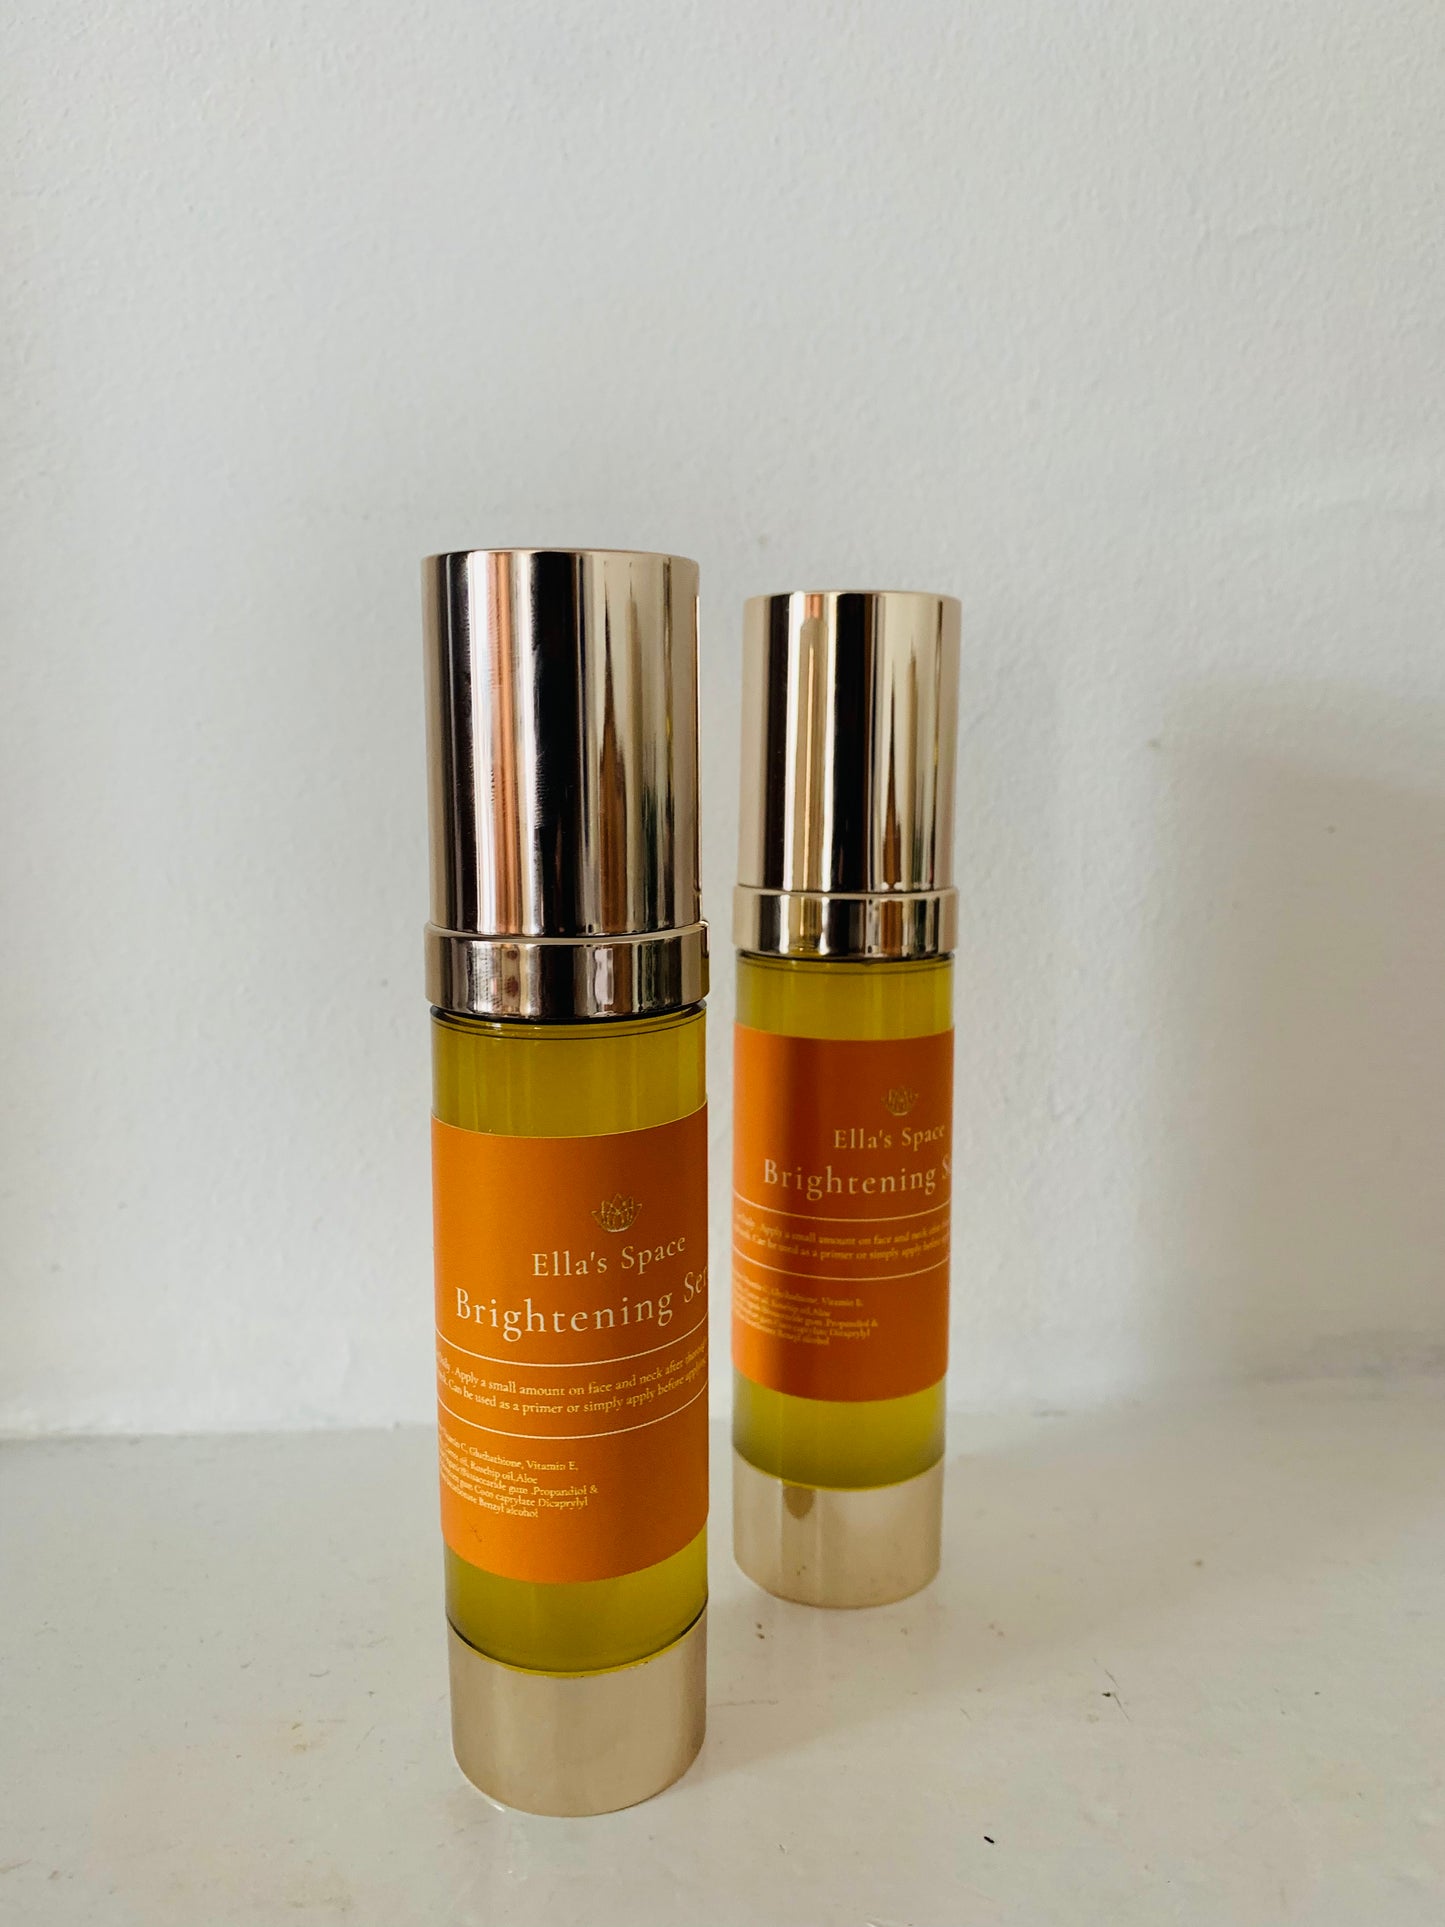 Serum : Brightening  Serum : A blend of plant extracts  that rejuvenate the skin, improve texture and feel of the skin.